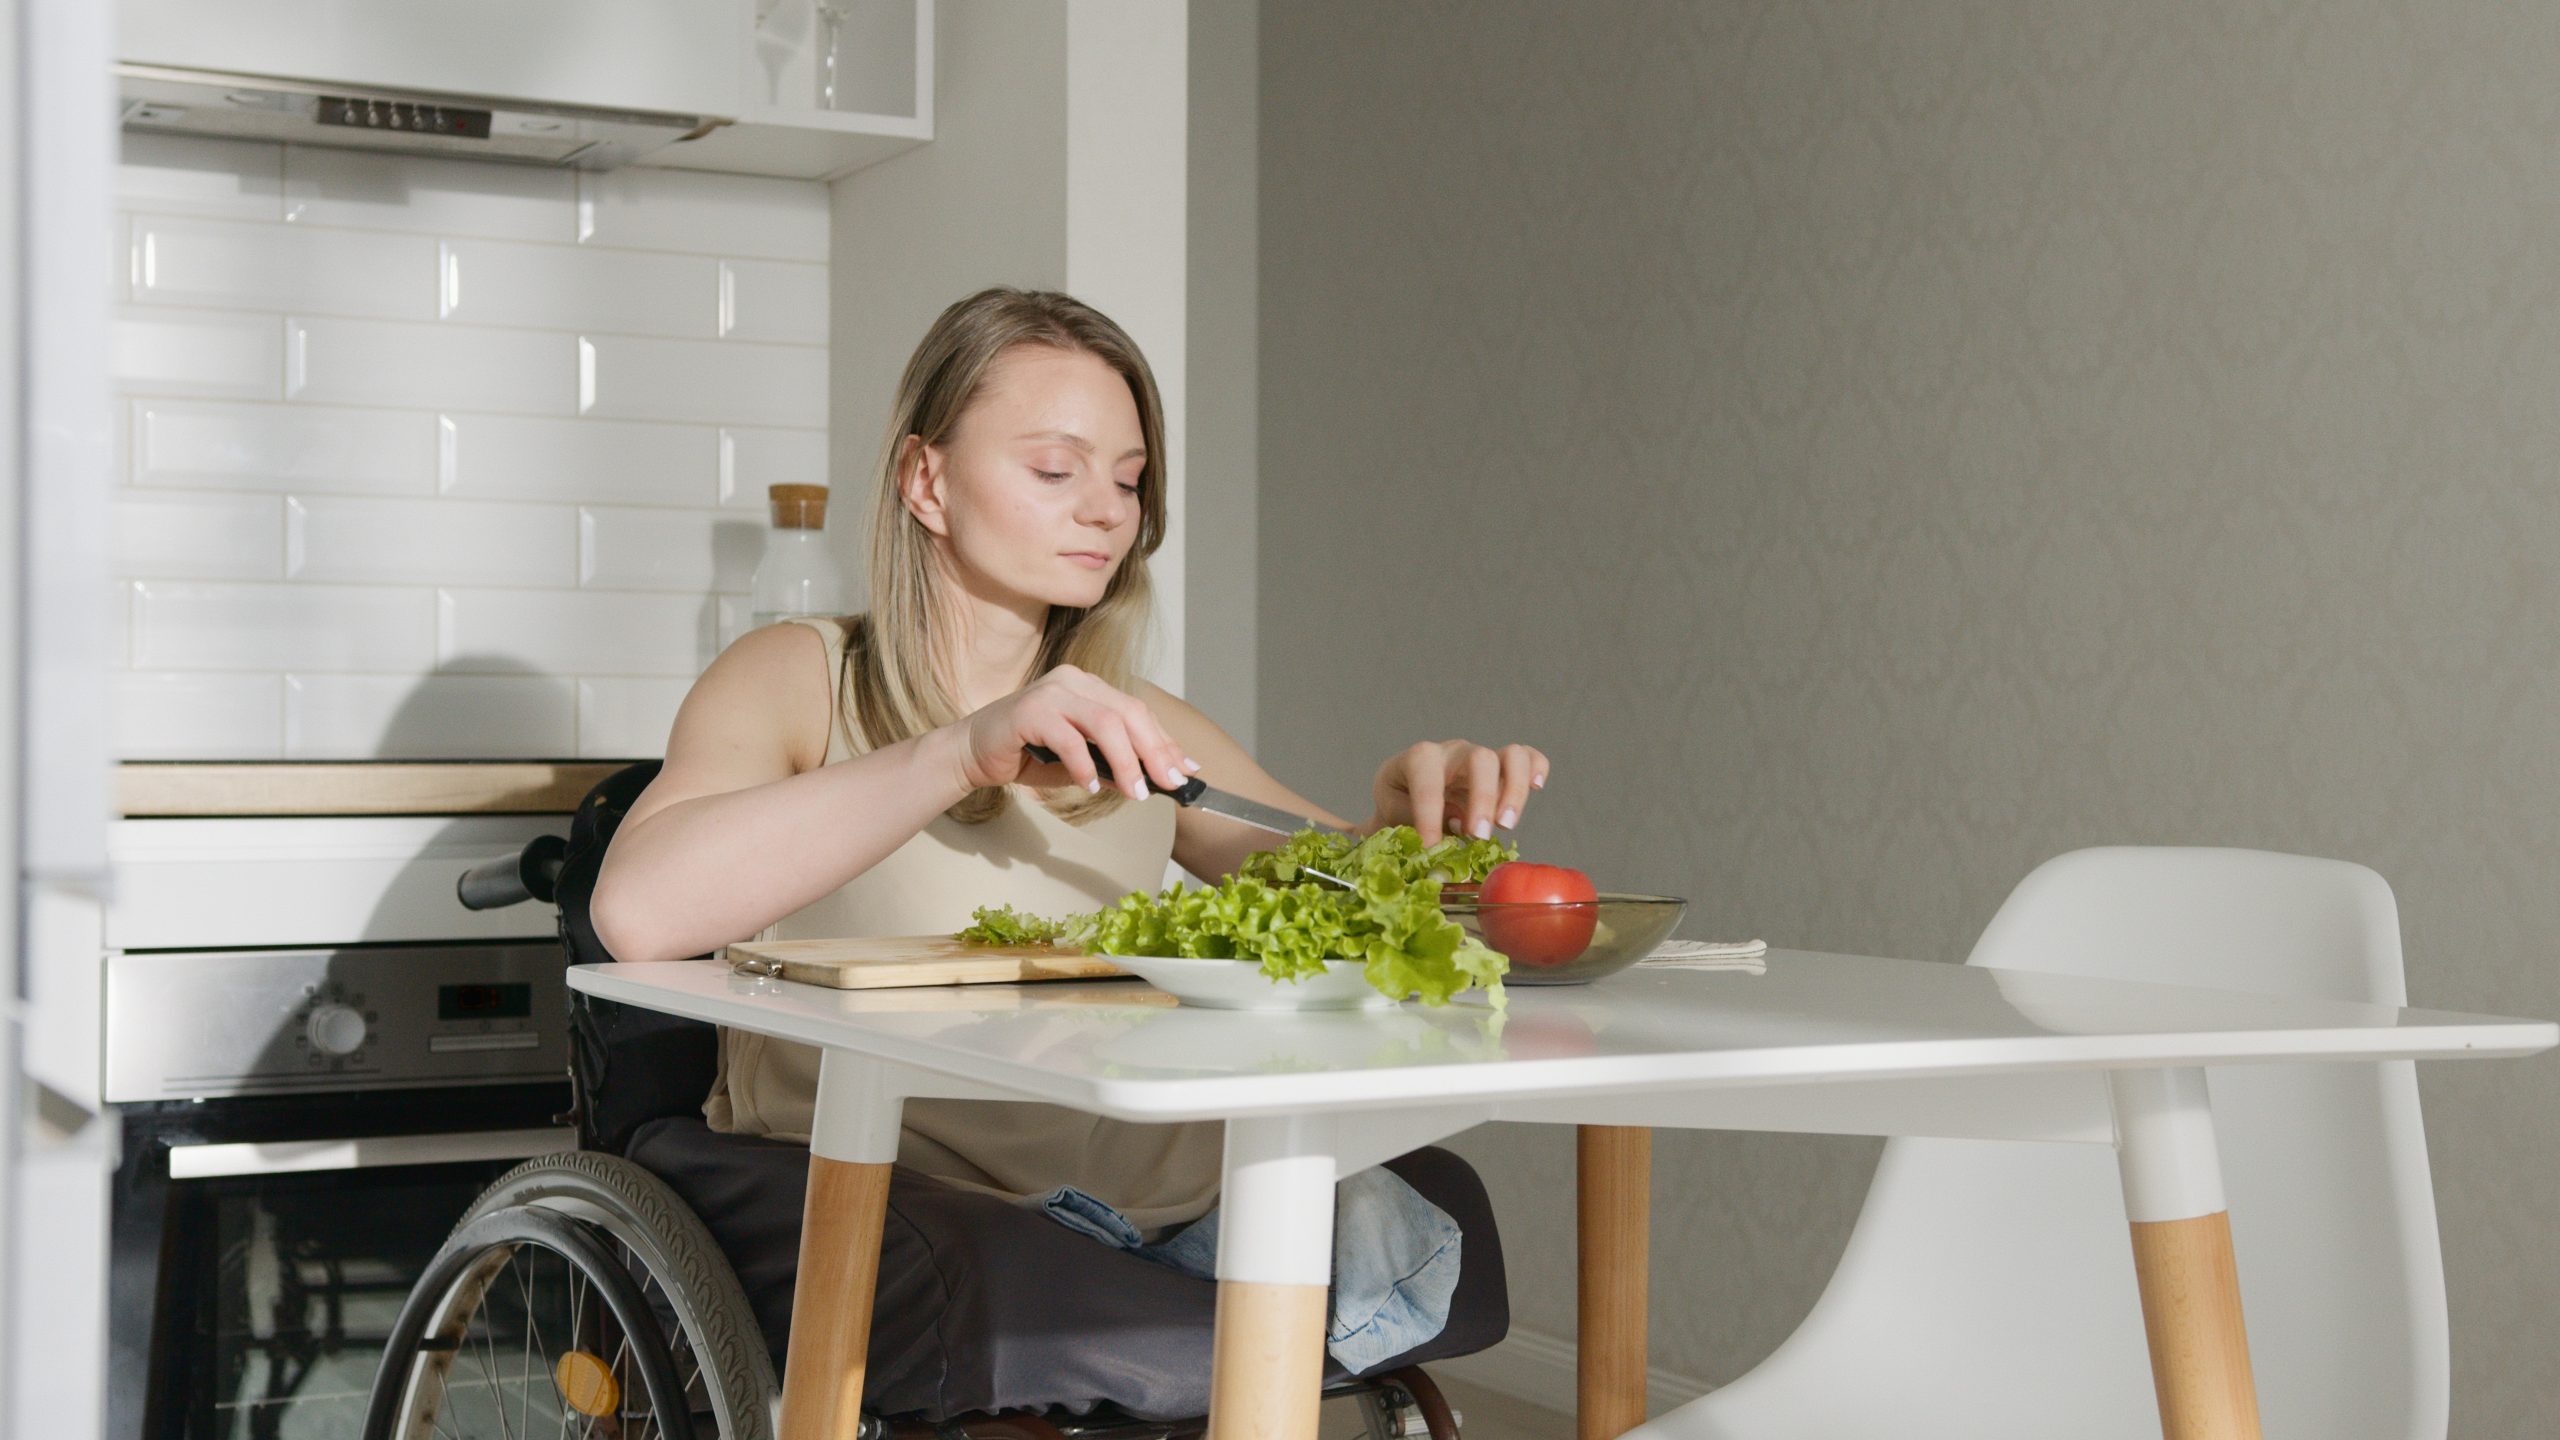 A woman in a wheelchair cuts vegetables at her kitchen table